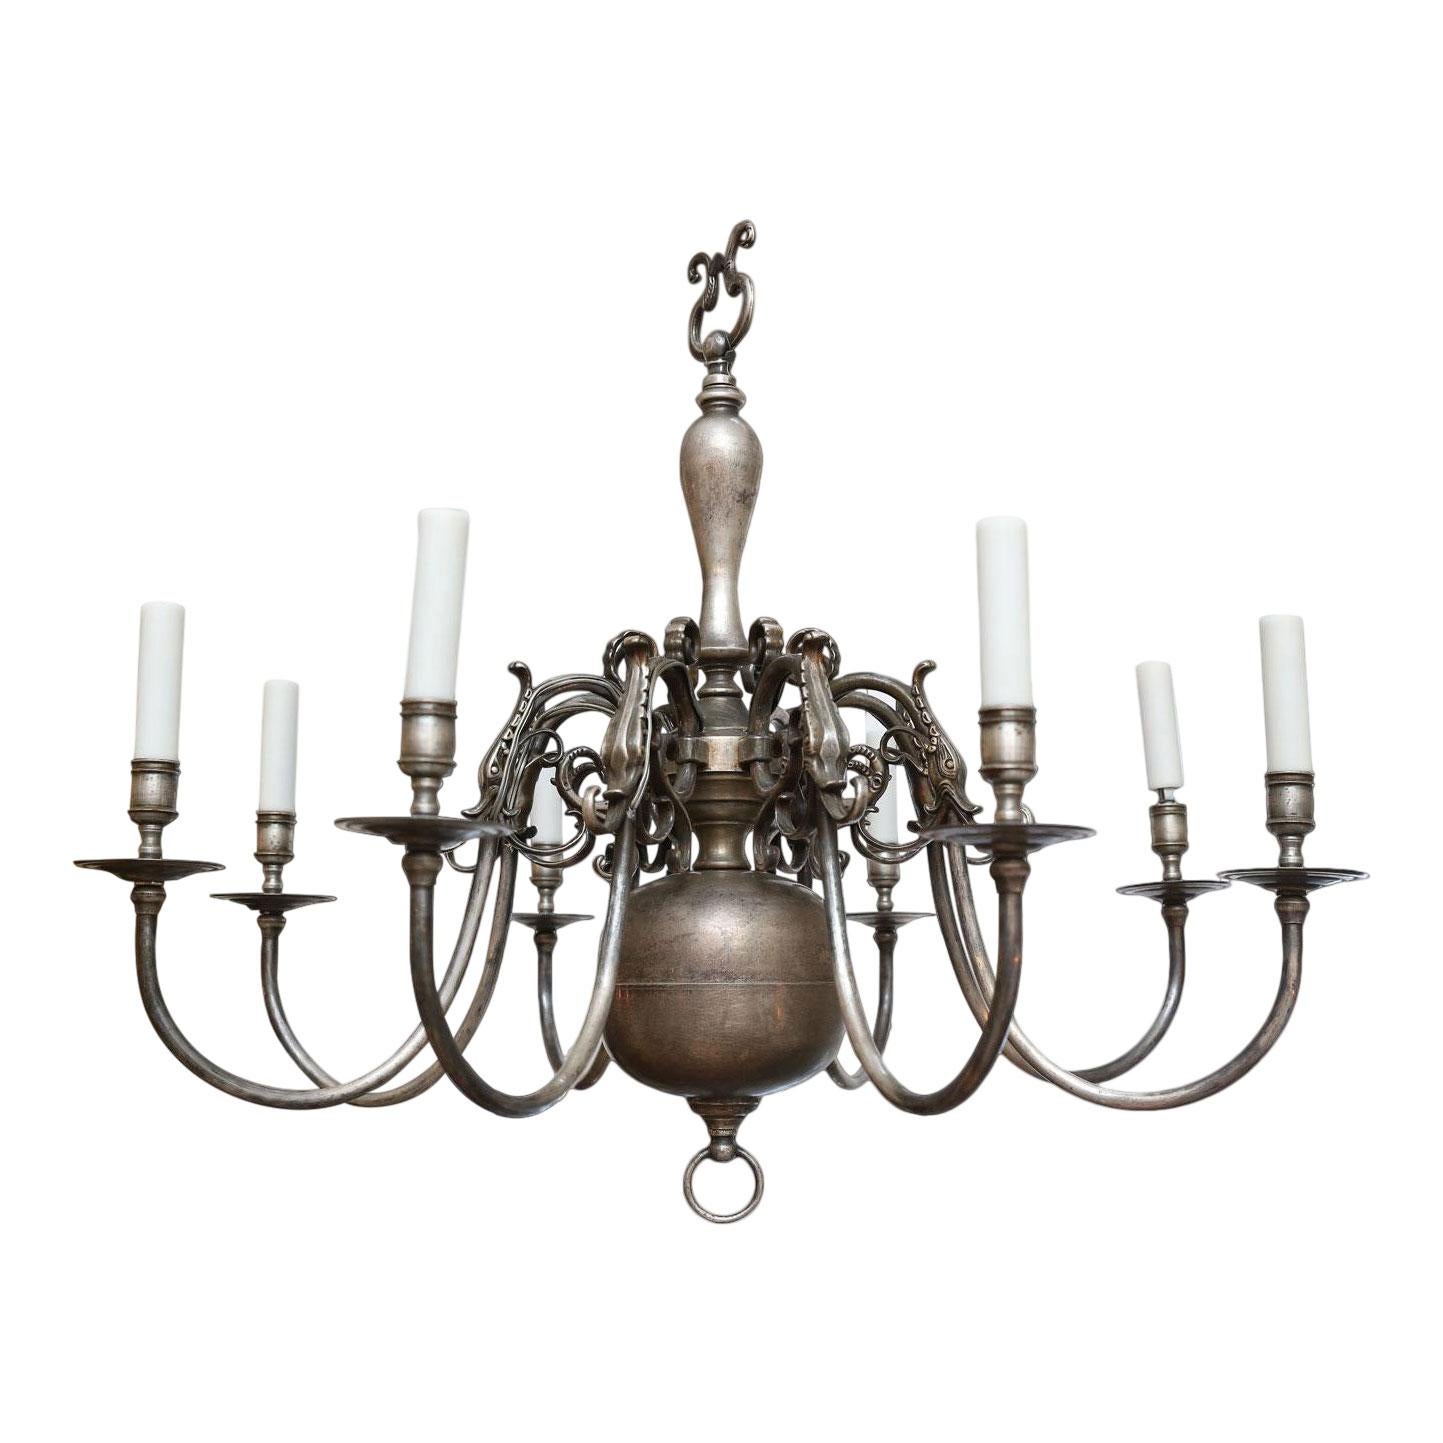 Pair of nickel on bronze Georgian style chandeliers (circa 1940s) with eight arms each. Candelabra-size sockets and newly wired for use within the USA. Wonderful color and natural patina. Includes chain and canopies. They are heavy and of